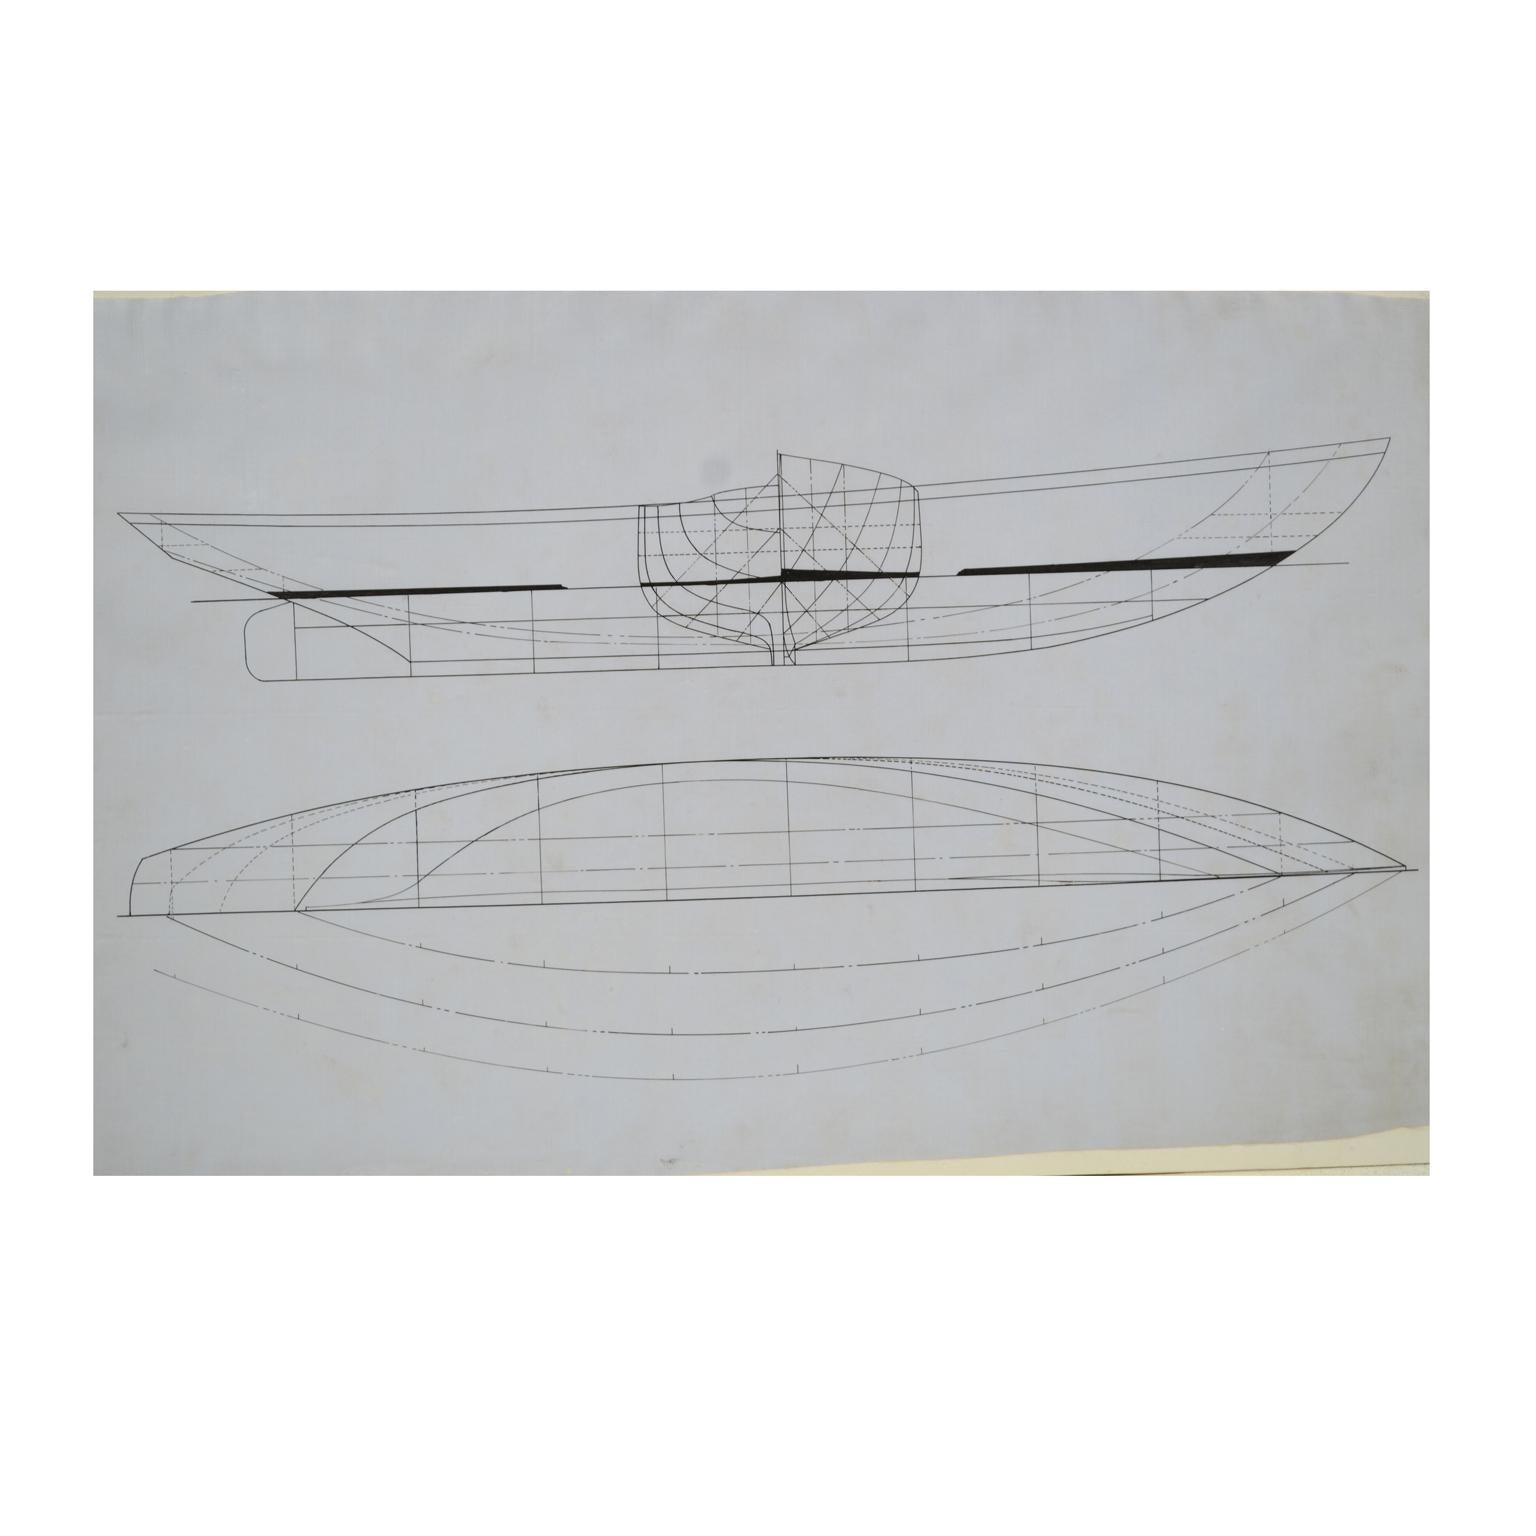 Anonymous boat. Measures: cm 72.5 x 45.4 (H) - inches 28.54 x 17.87 (H). 1920s. Project coming from the archives of Uffa Fox, an English boat designer and sailing enthusiast, and never entered the commercial circuit.
Uffa Fox was born in the Isle